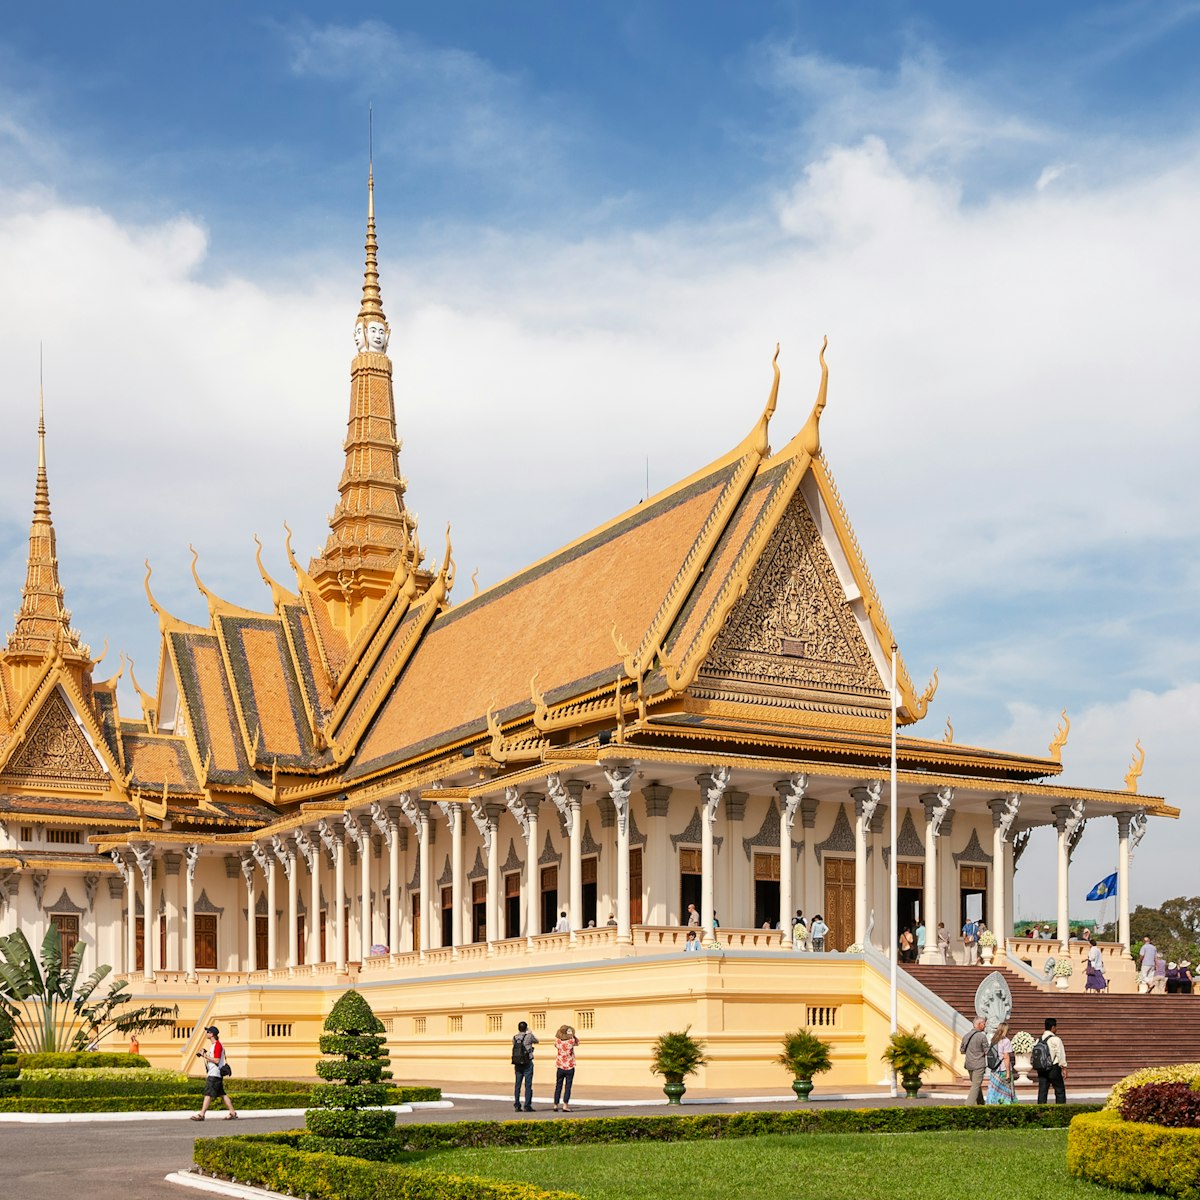 Throne Hall building at the Royal Palace in Phnom Penh, Cambodia.